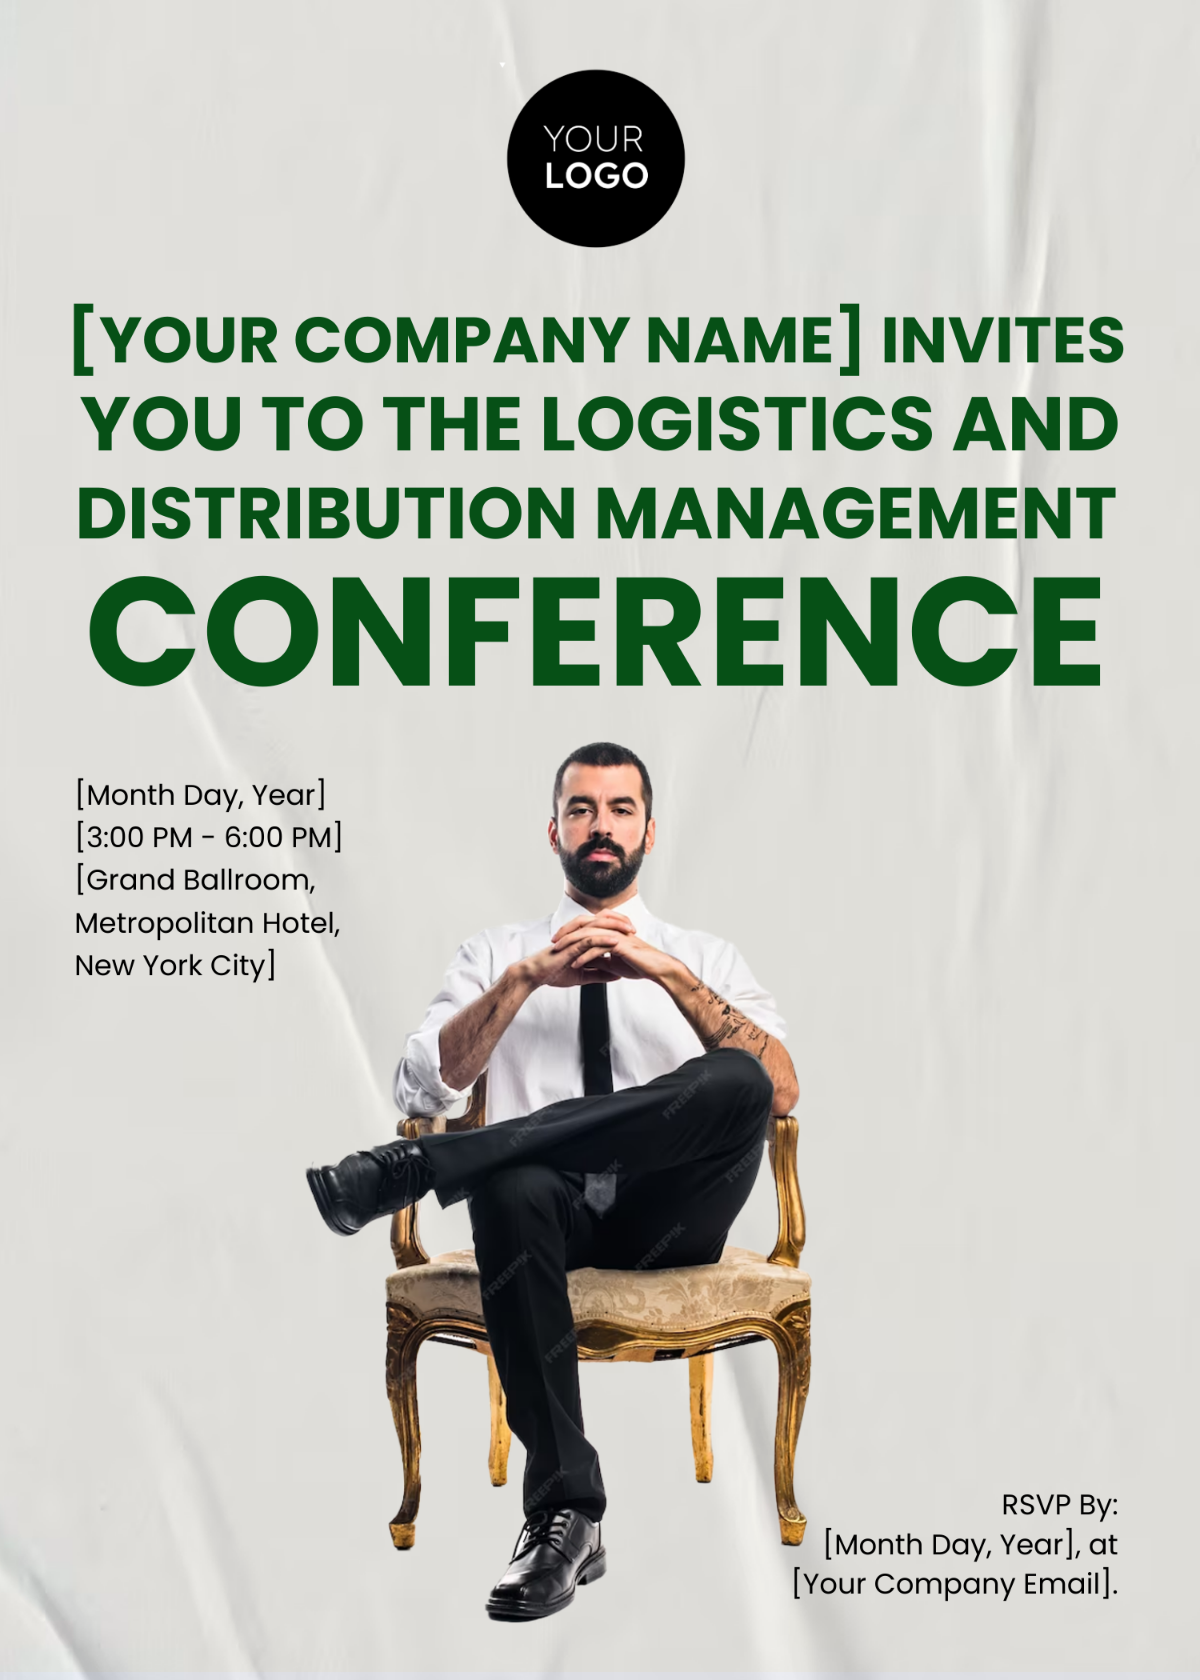 Logistics and Distribution Management Conference Invitation Card Template